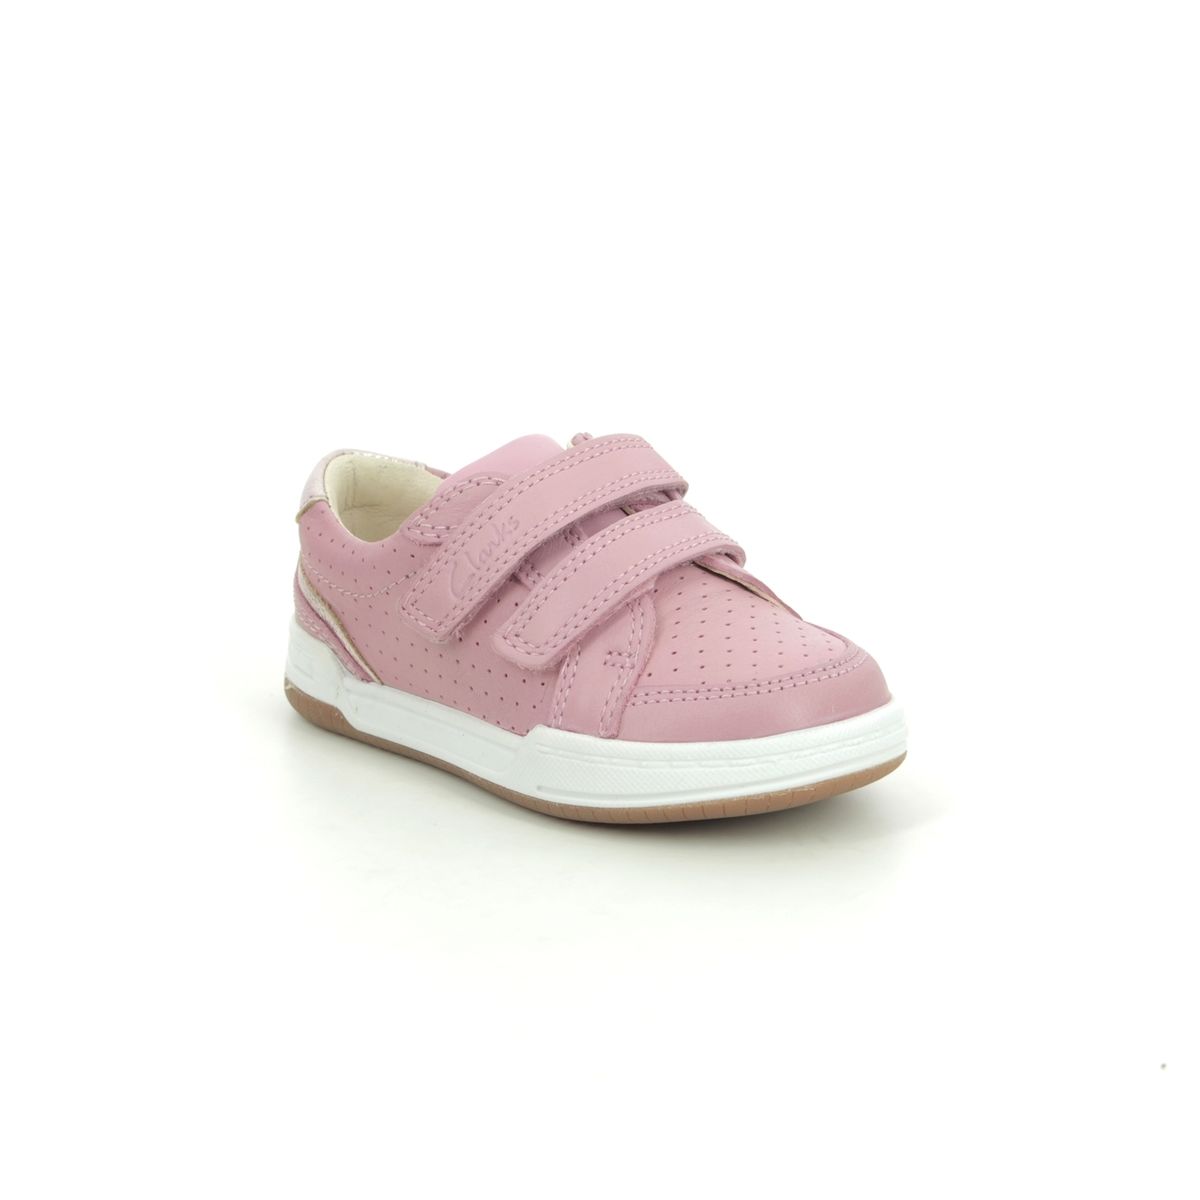 Clarks Fawn Solo T Pink Leather Kids First And Toddler 589895E In Size 8 In Plain Pink Leather E Width Fitting Narrow Fit For kids